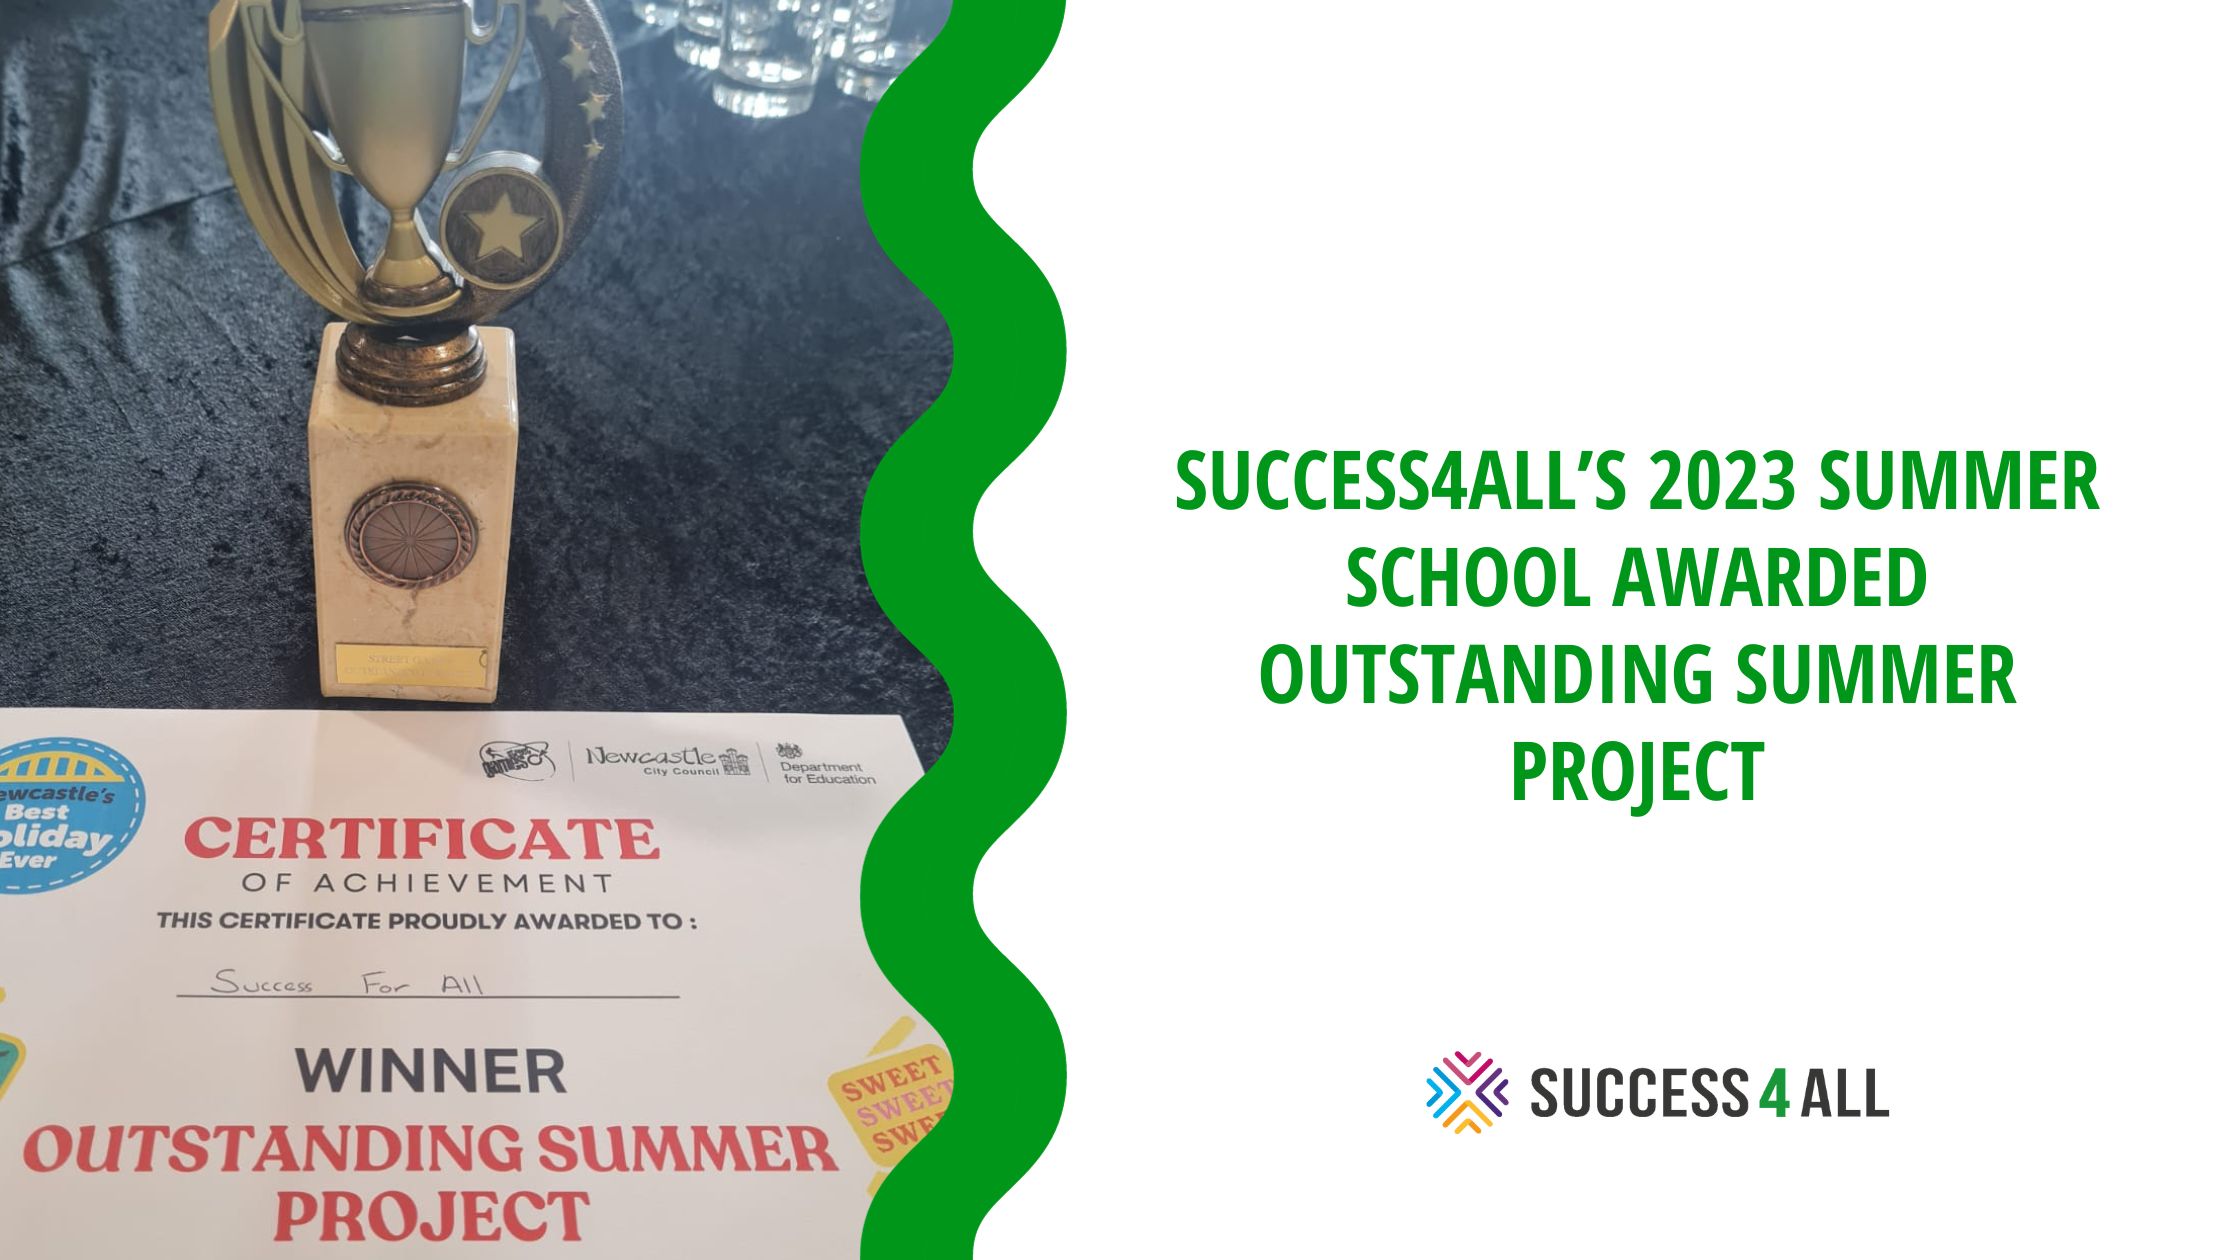 Success4All’s 2023 Summer School Awarded Outstanding Summer Project